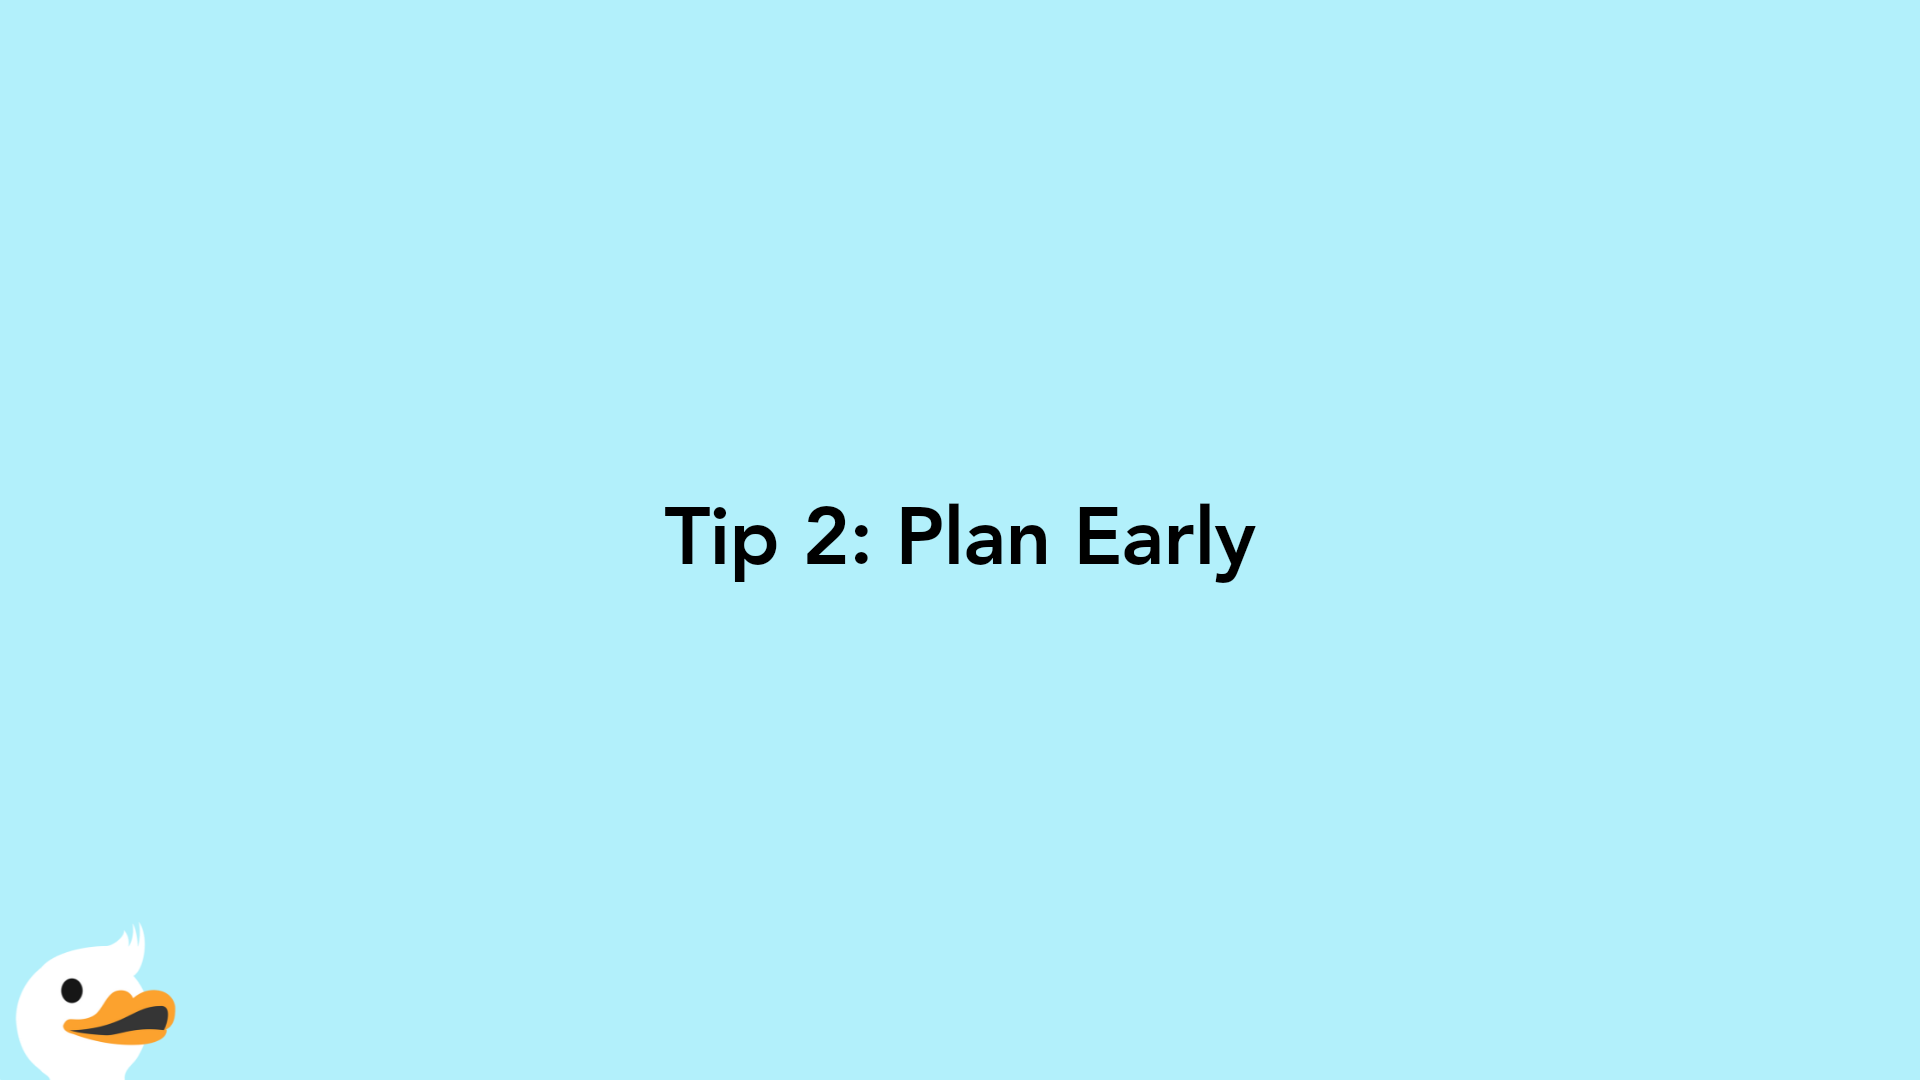 Tip 2: Plan Early